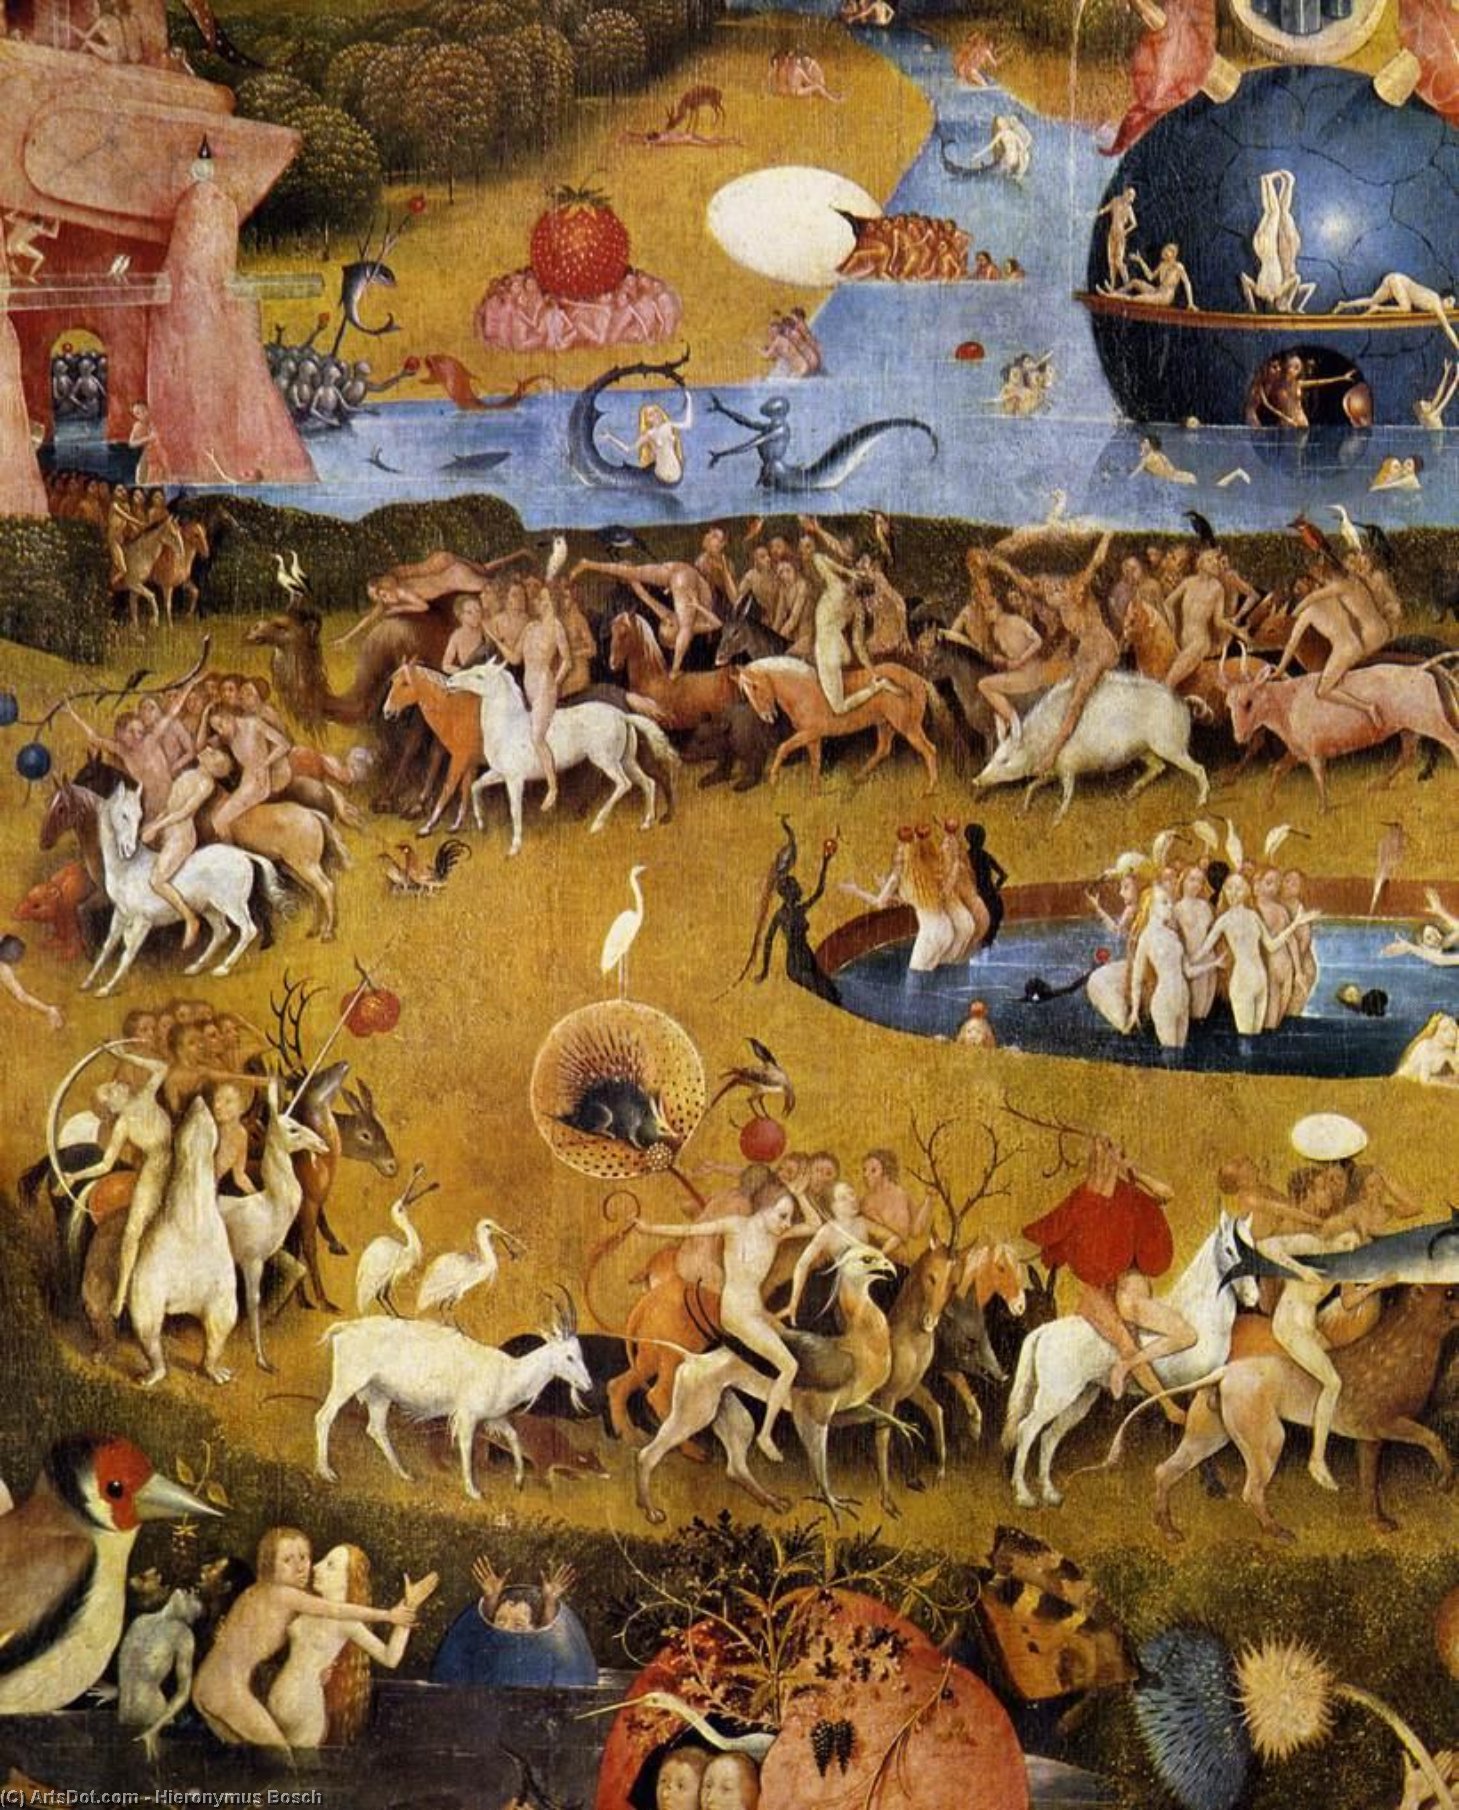 WikiOO.org - Encyclopedia of Fine Arts - Lukisan, Artwork Hieronymus Bosch - Triptych of Garden of Earthly Delights (detail) (47)